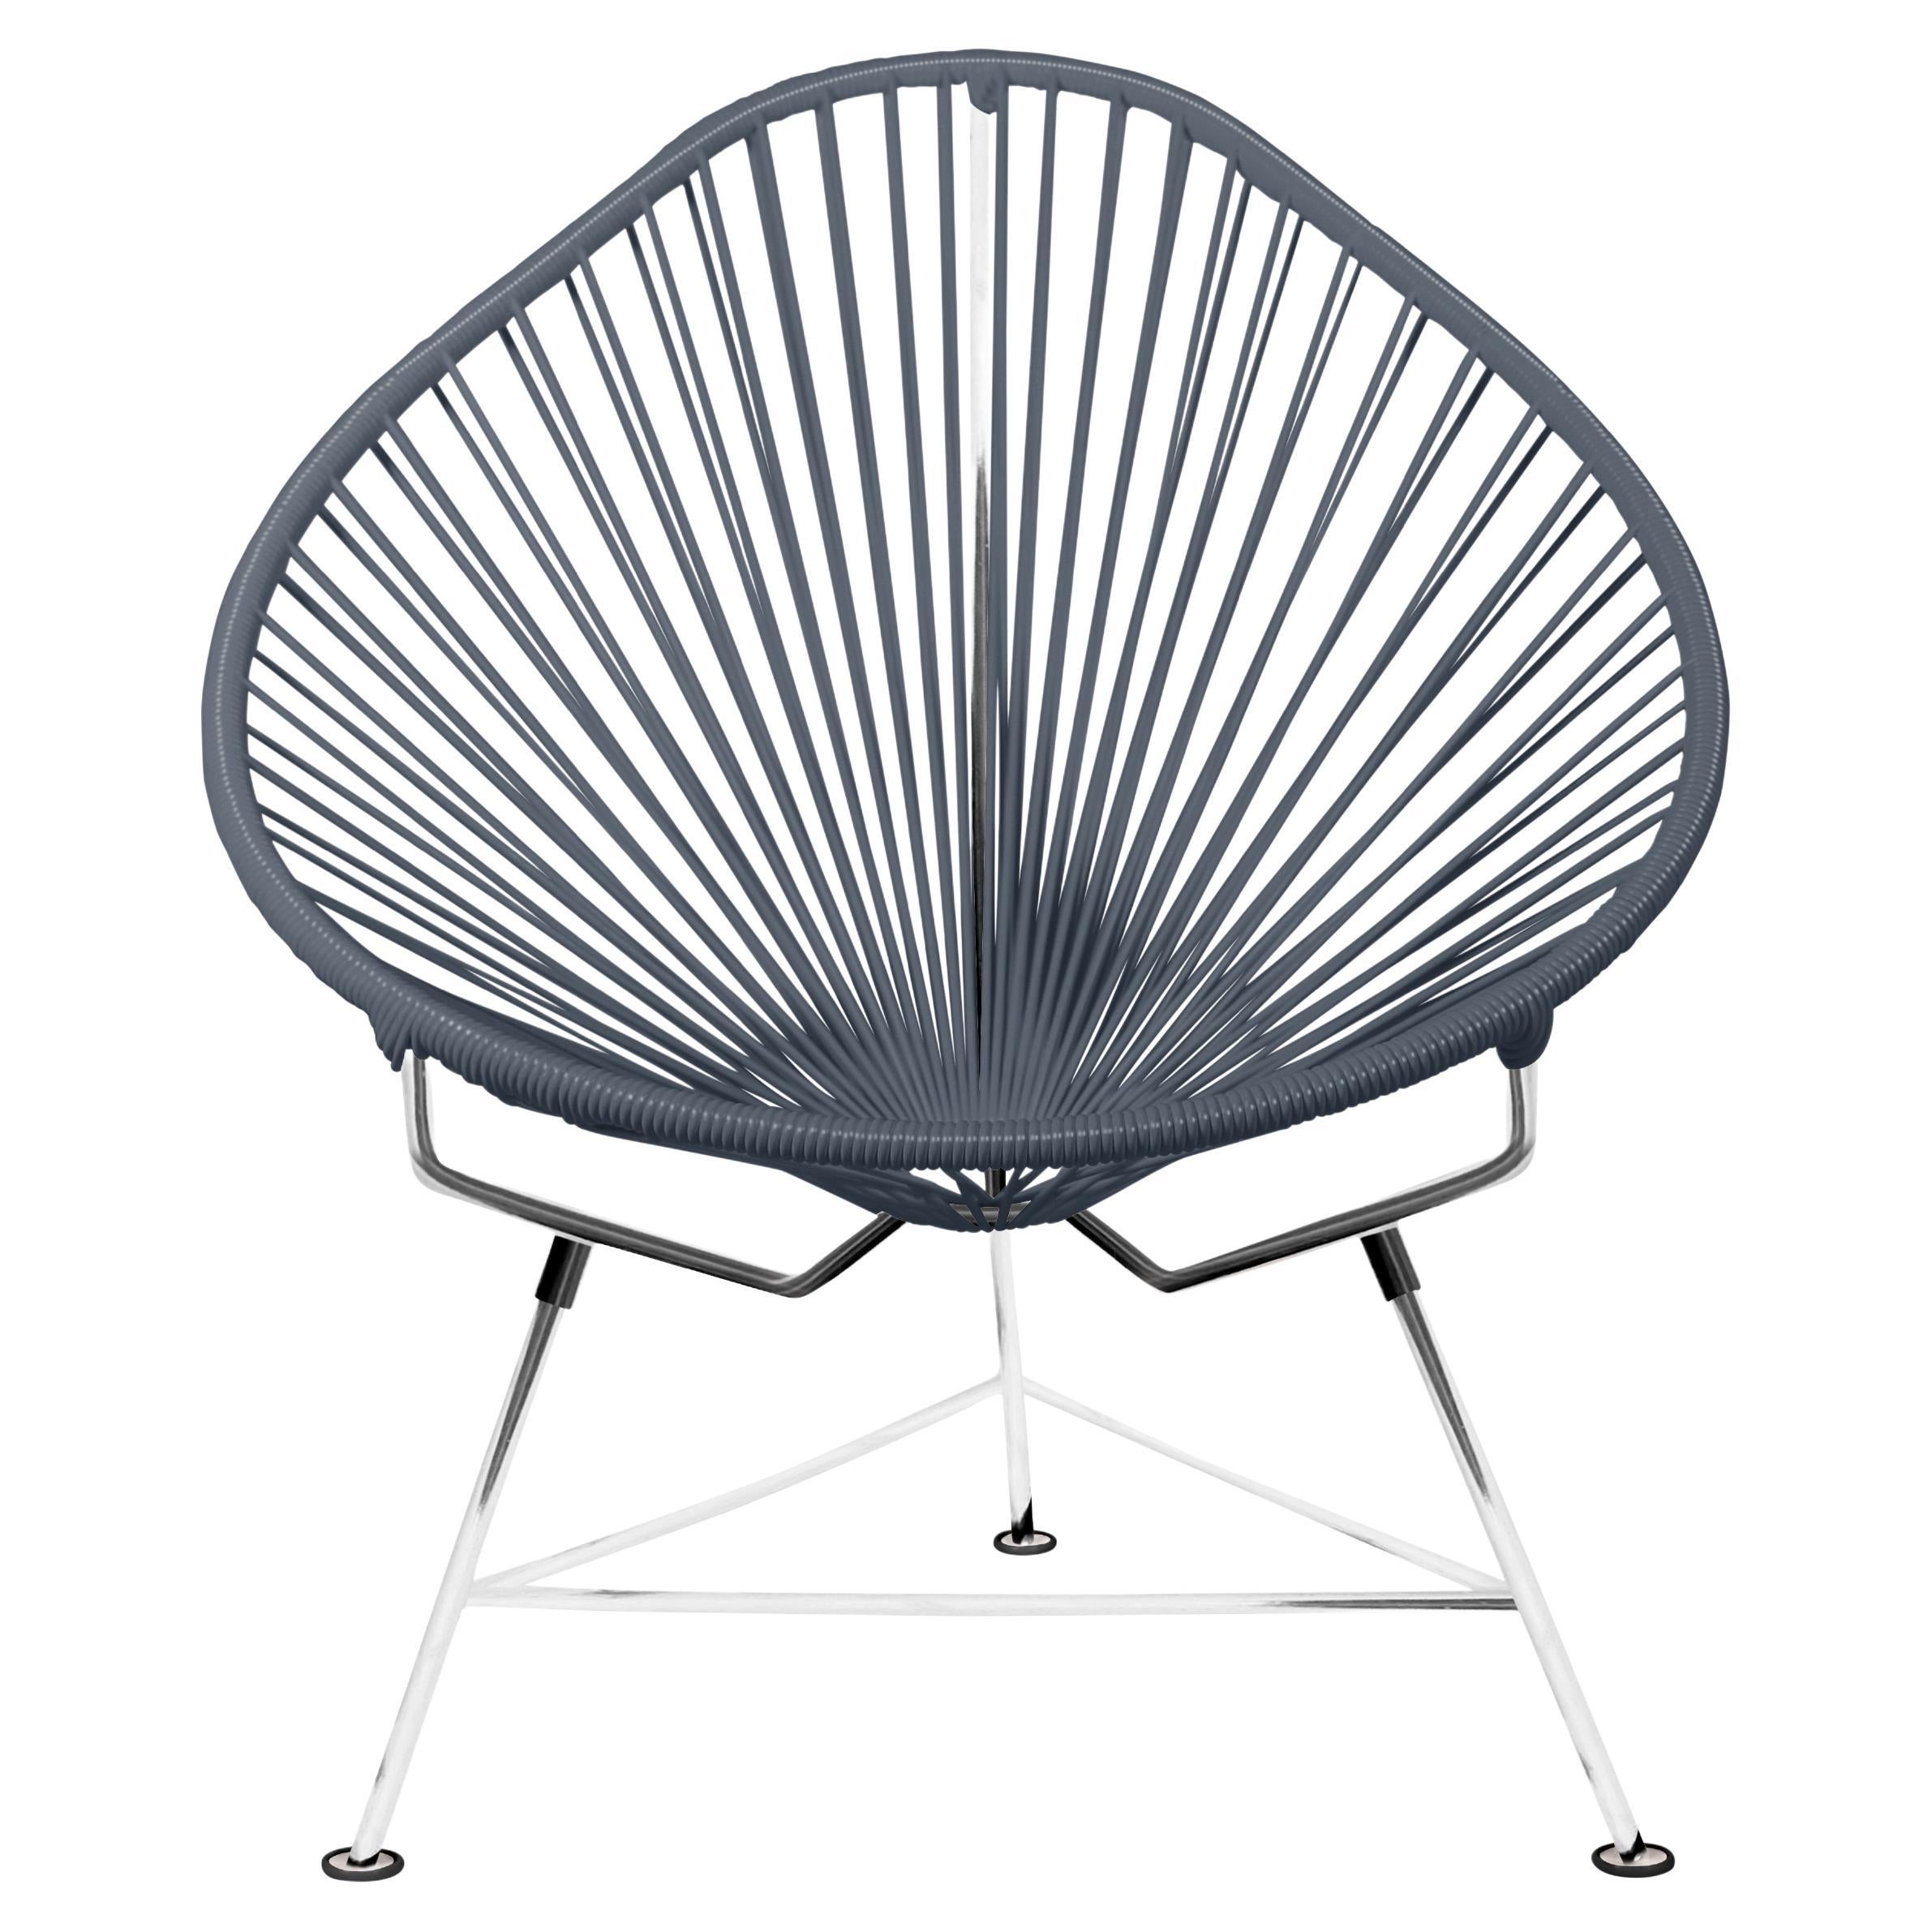 Innit Designs Acapulco Chair Grey Weave on Chrome Frame